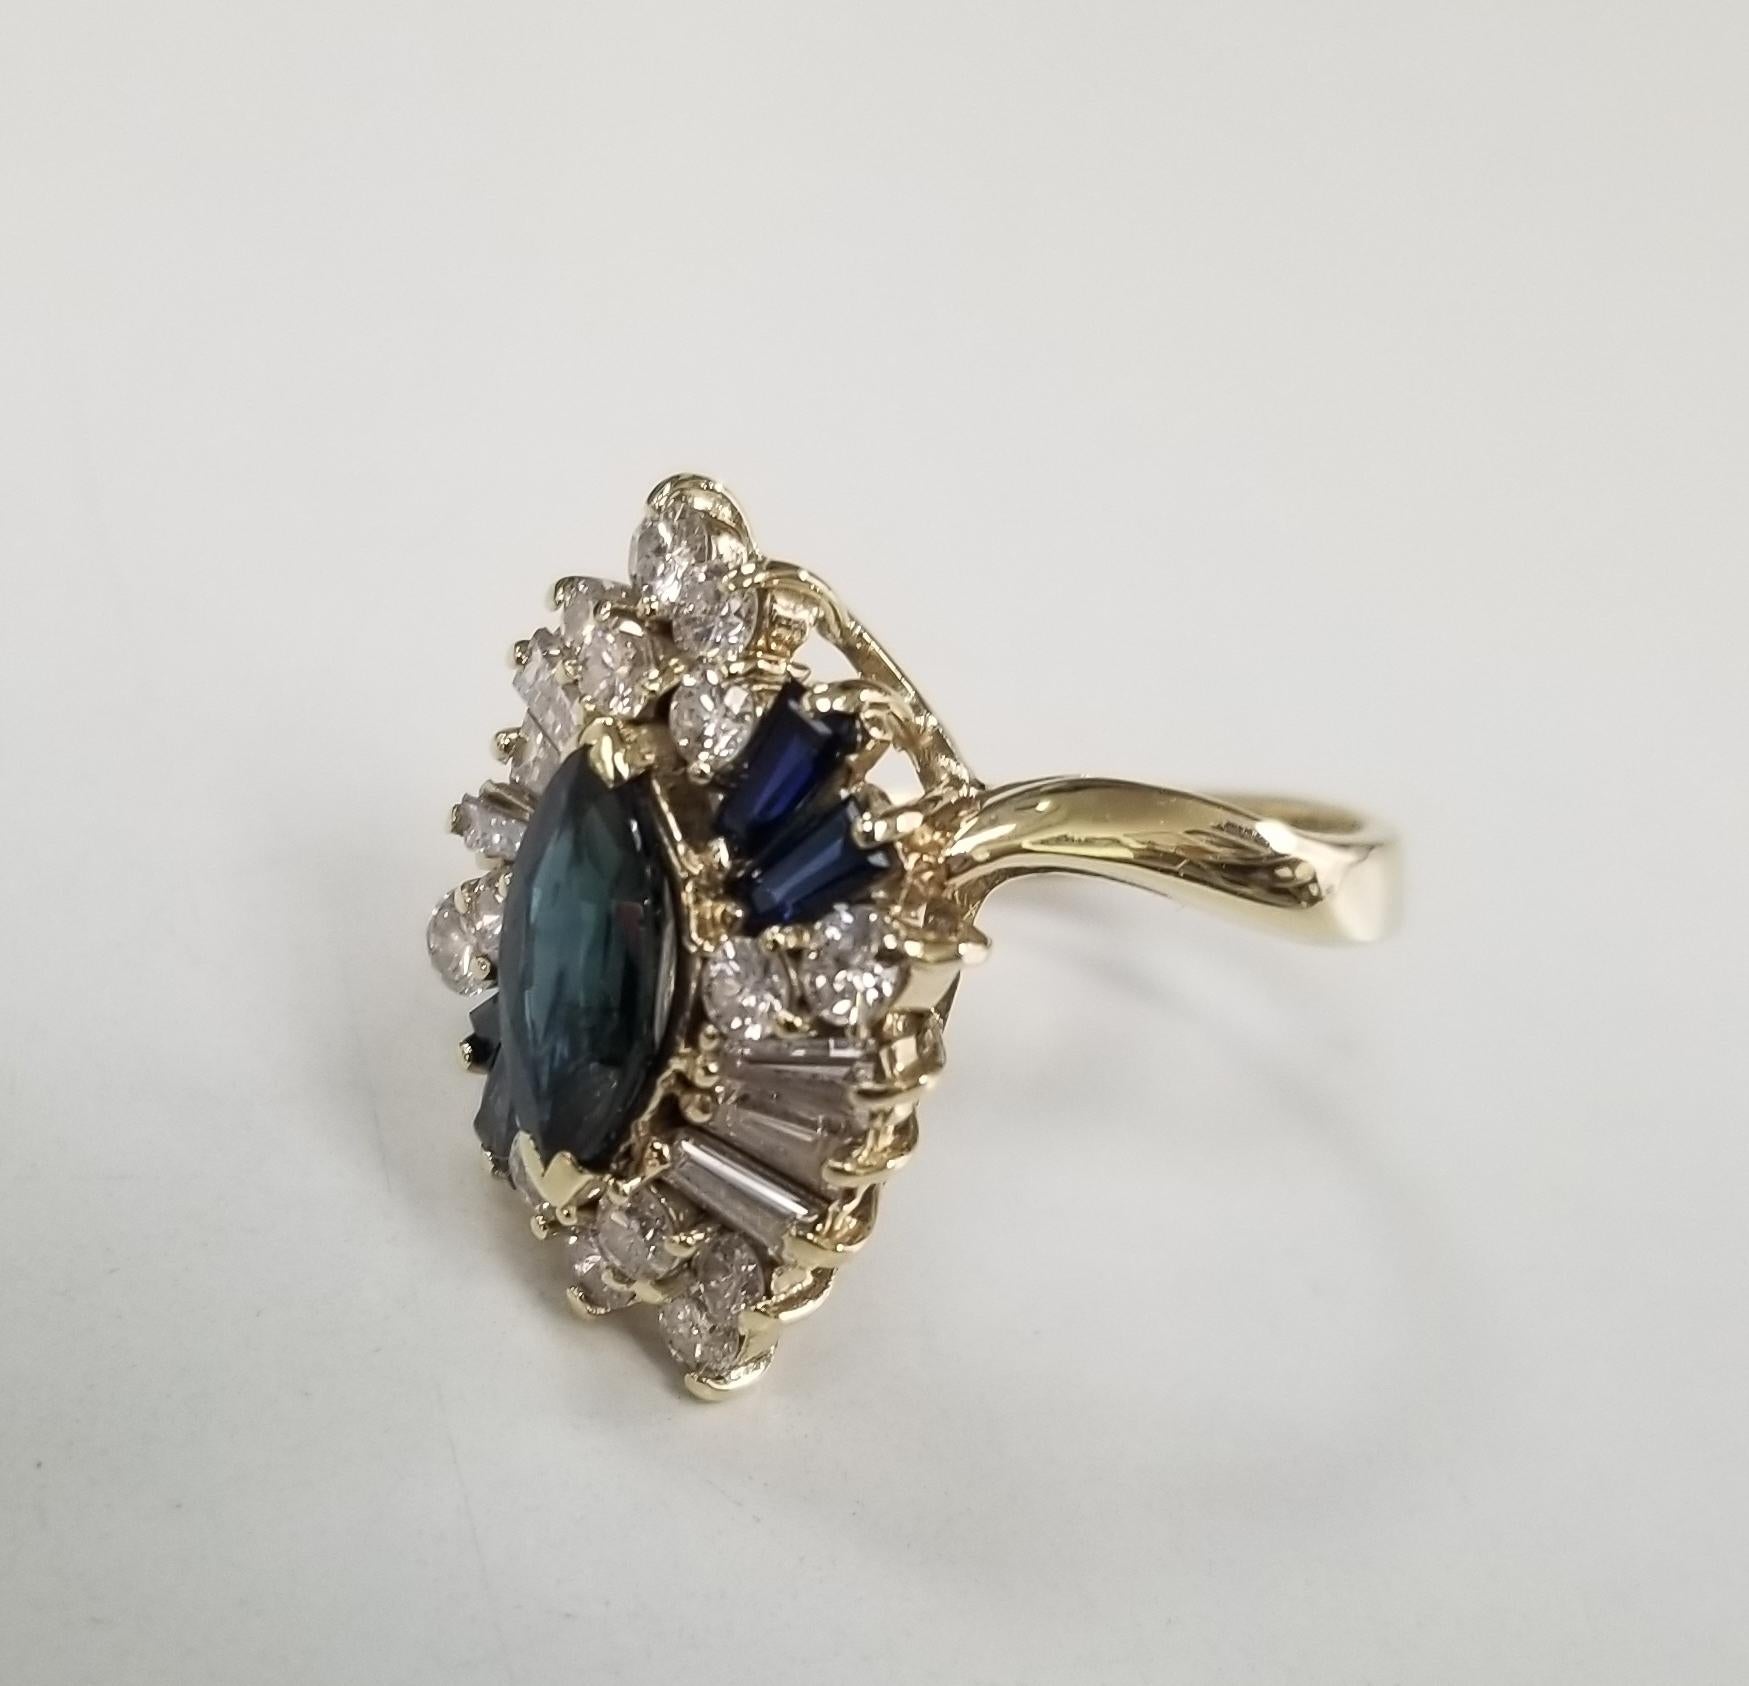 Specifications:    
    MAIN stone: 20 PCS  DIAMOND APPROX 1.10CTW
    SIDE STONES: 5 PCS SAPPHIRES 
    CARAT TOTAL WEIGHT: 1.10cts.
    COLOR/clarity: G/VS
    brand: UNBRANDED
    metal: 14K YELLOW GOLD
    type: RING
    weight: 5 GRAMS
   